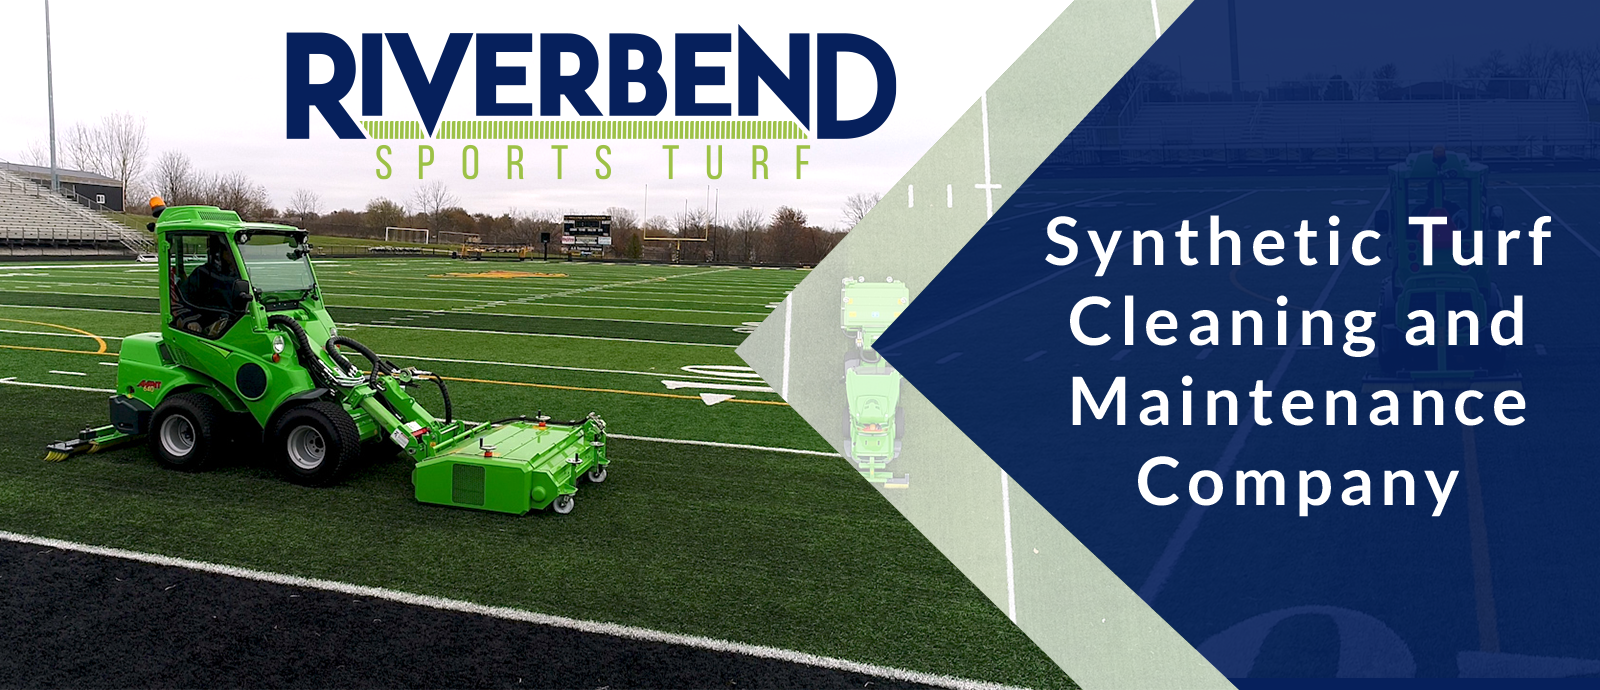 Tractor equipment on a football field with the Riverbend Sports Turf logo and text reading Synthetic Turf Cleaning and Maintenance Company